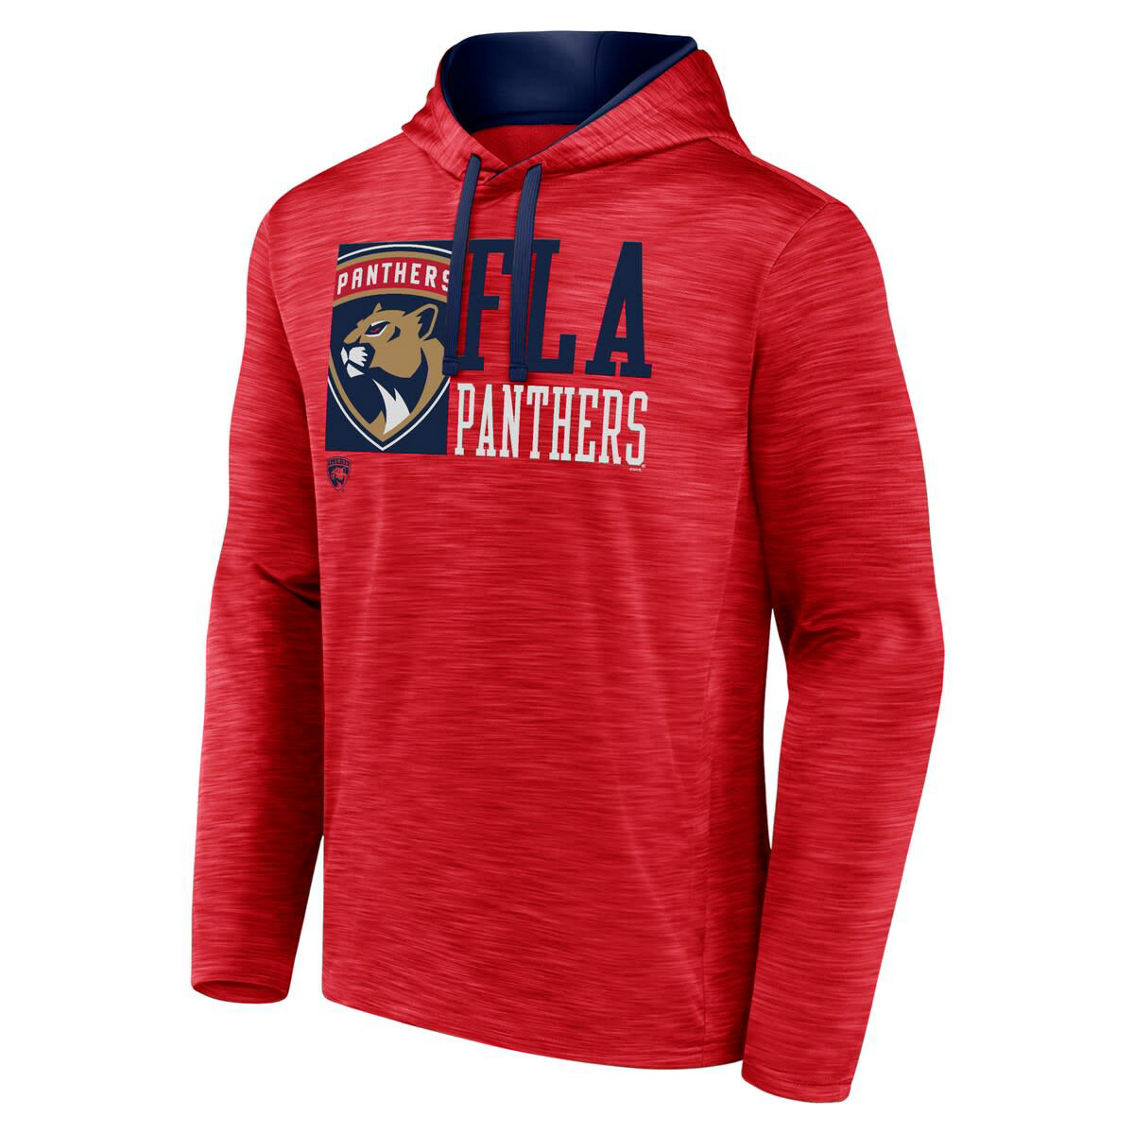 Fanatics Men's Fanatics Red Florida Panthers Never Quit Pullover Hoodie - Image 3 of 4